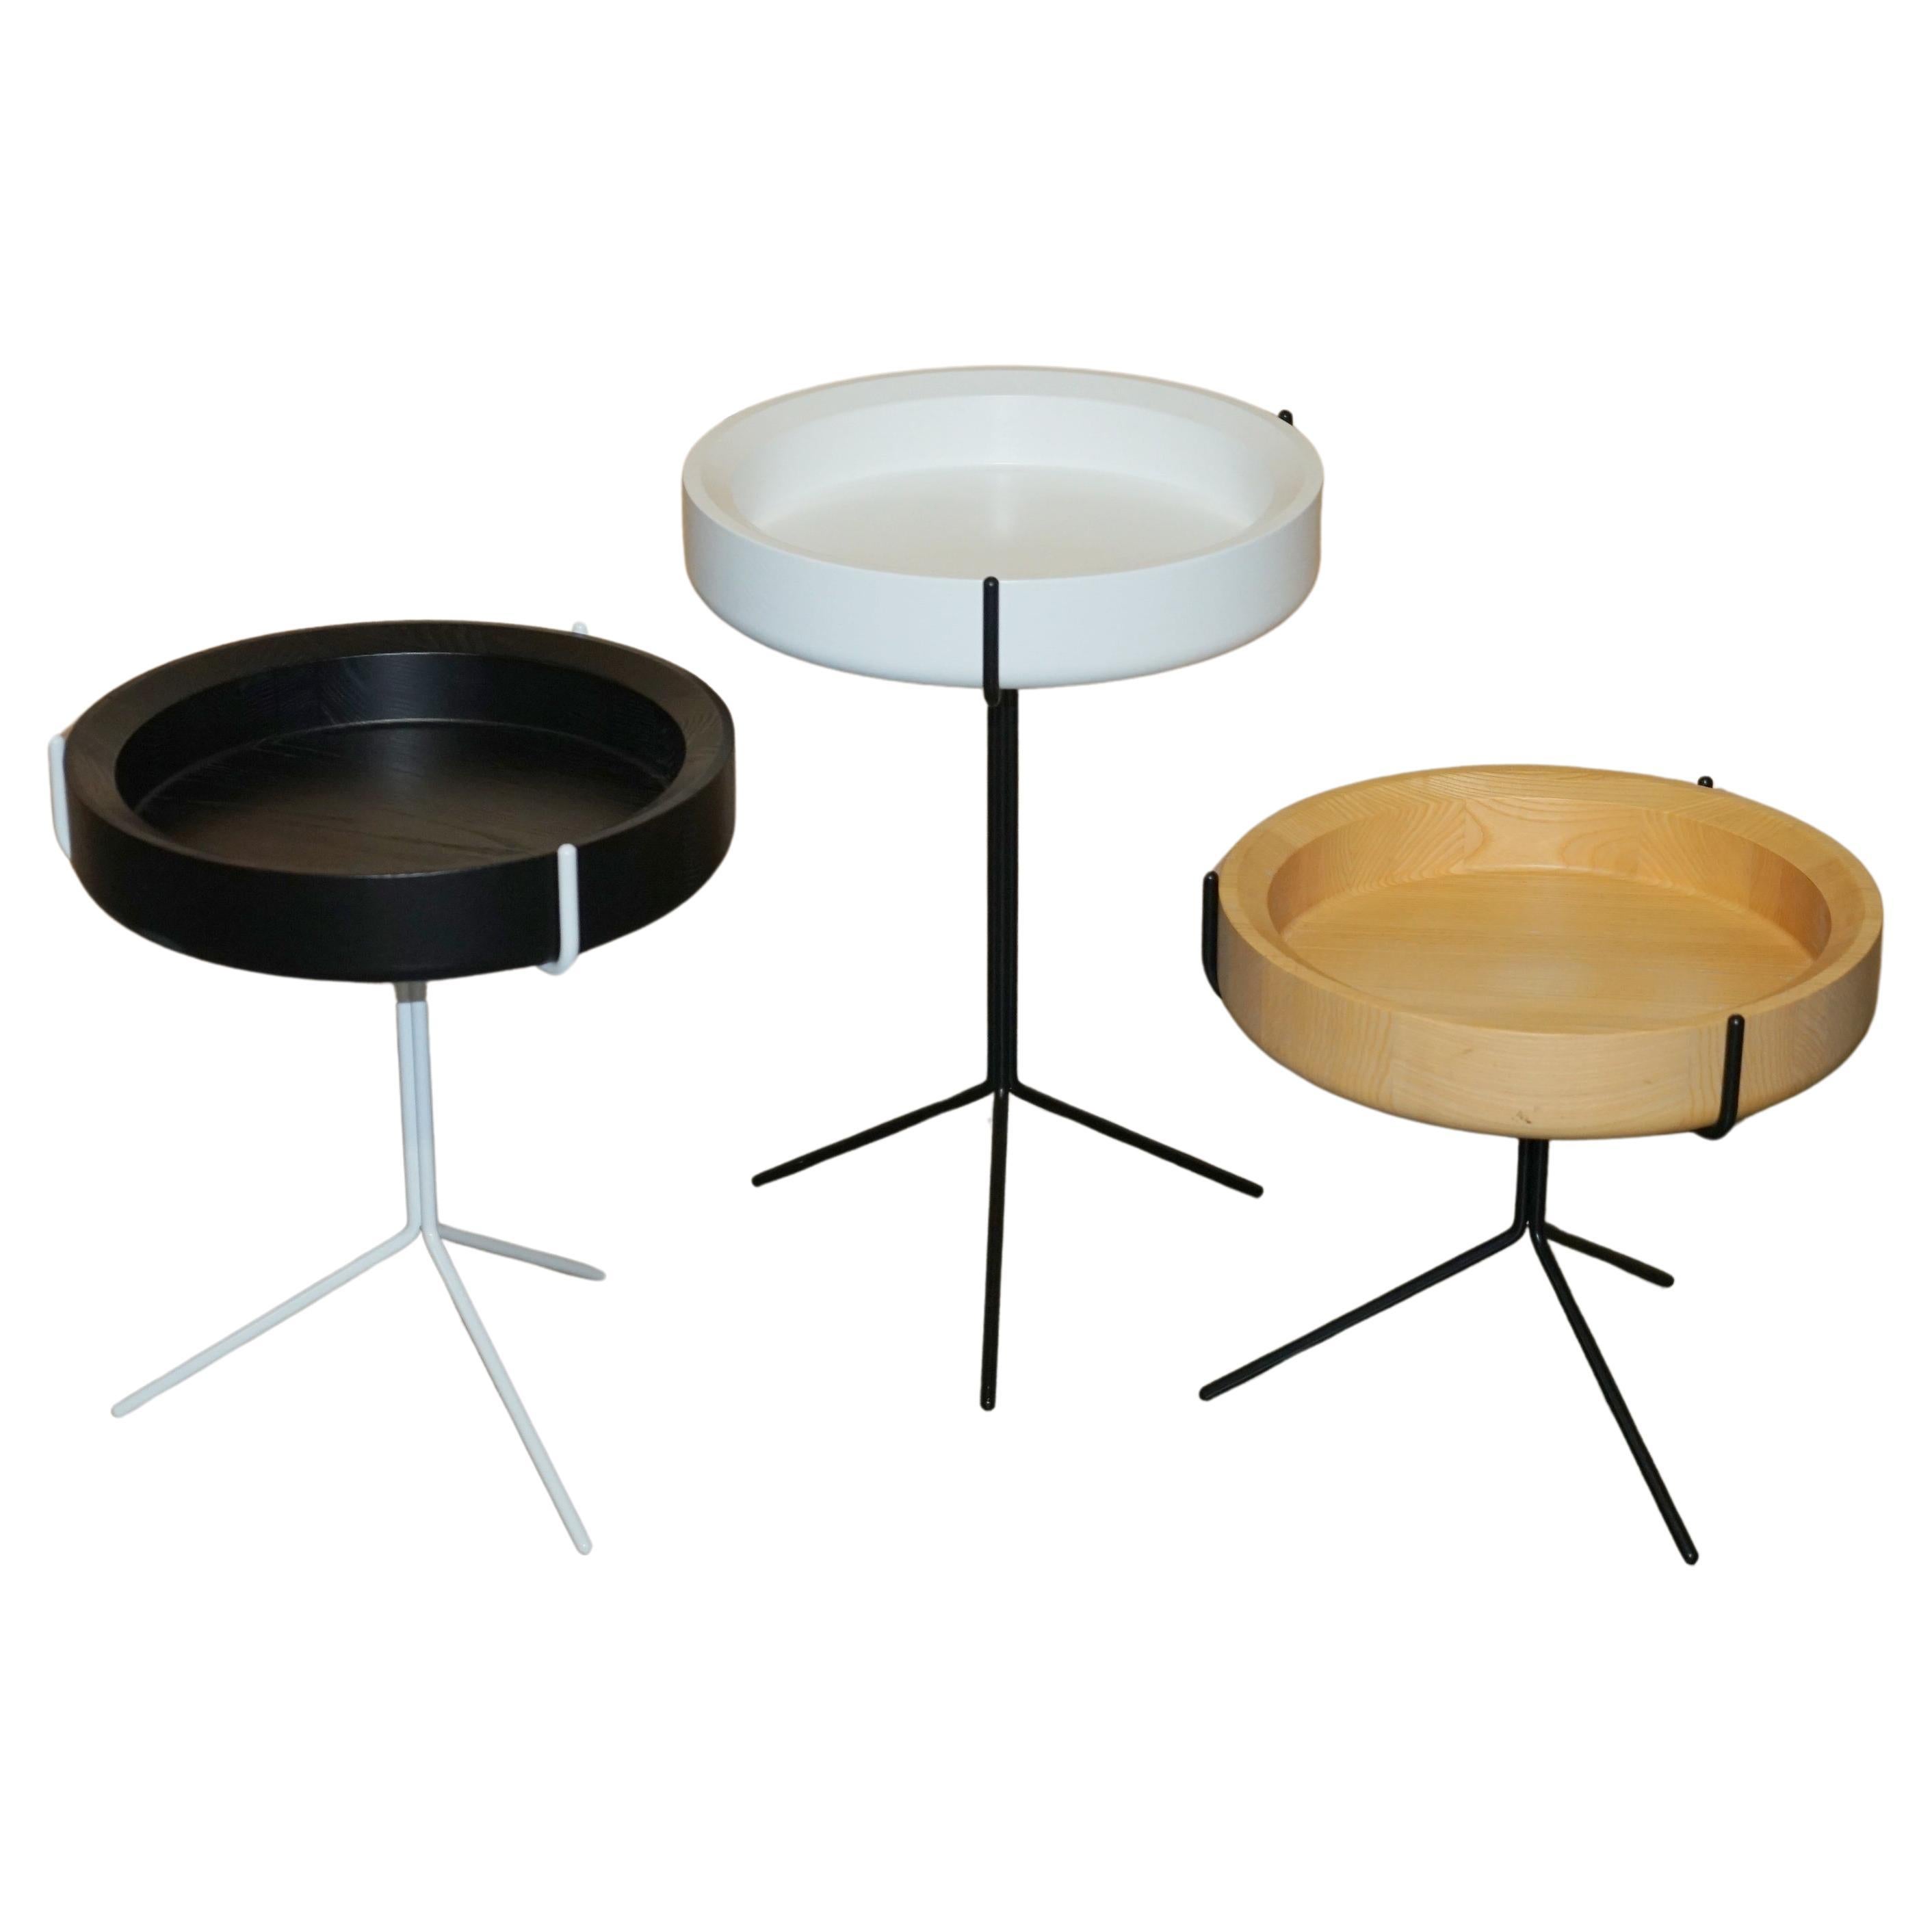 NEST OF THREE ASH WOOD SWEDESE MOBLER SiDE TABLES DESIGNED BY CORINNA WARM For Sale